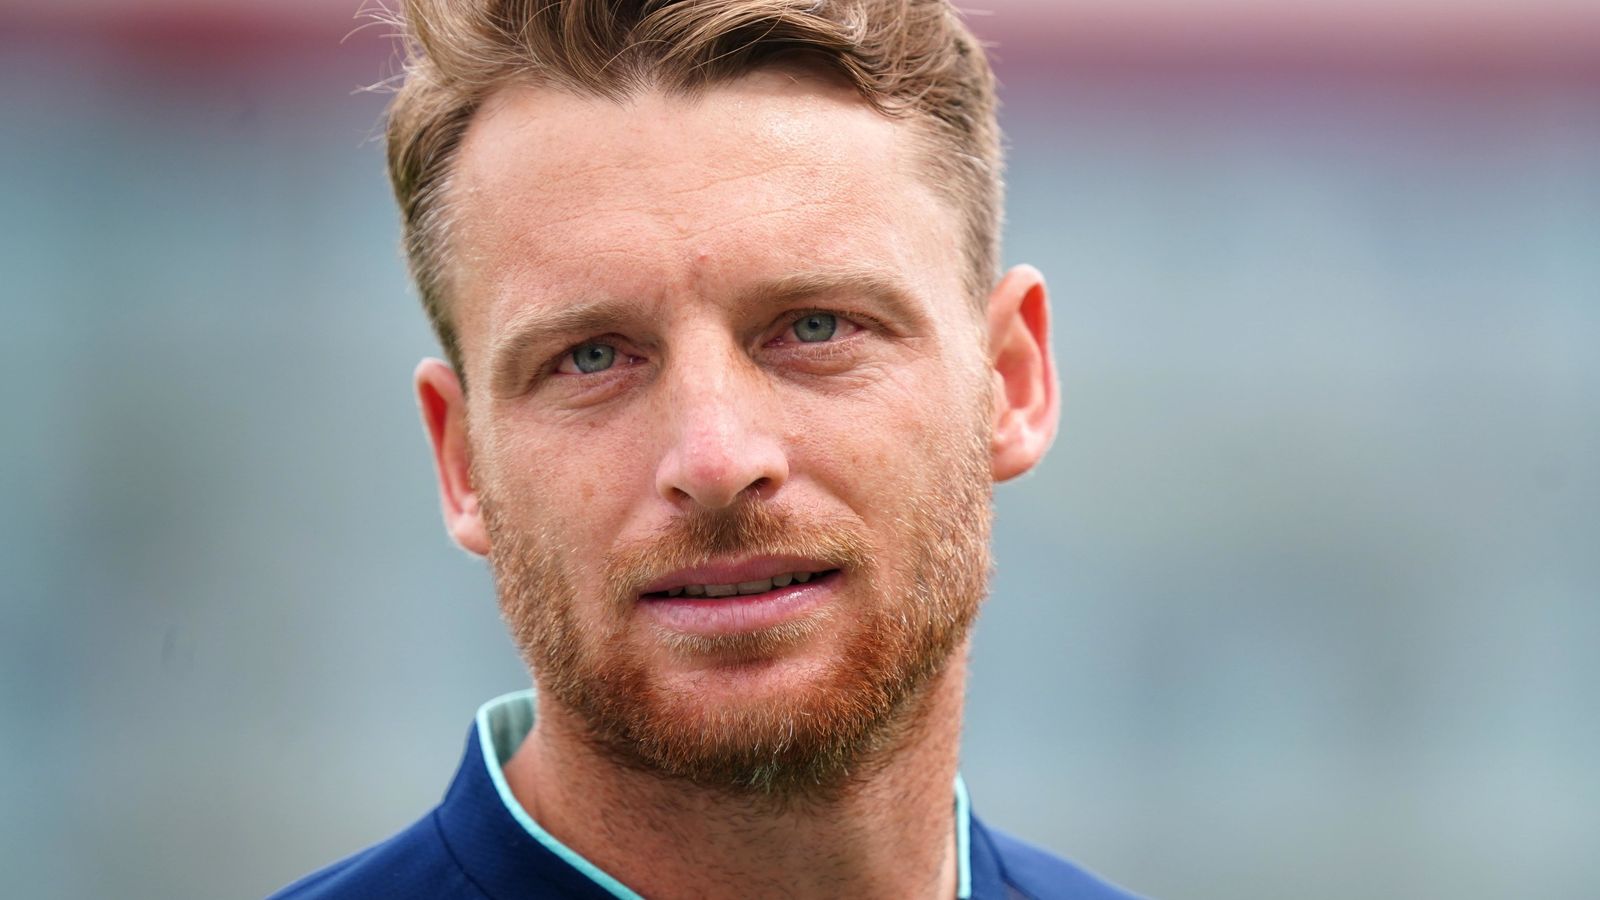 England to bat first in ODI opener against West Indies LIVE!